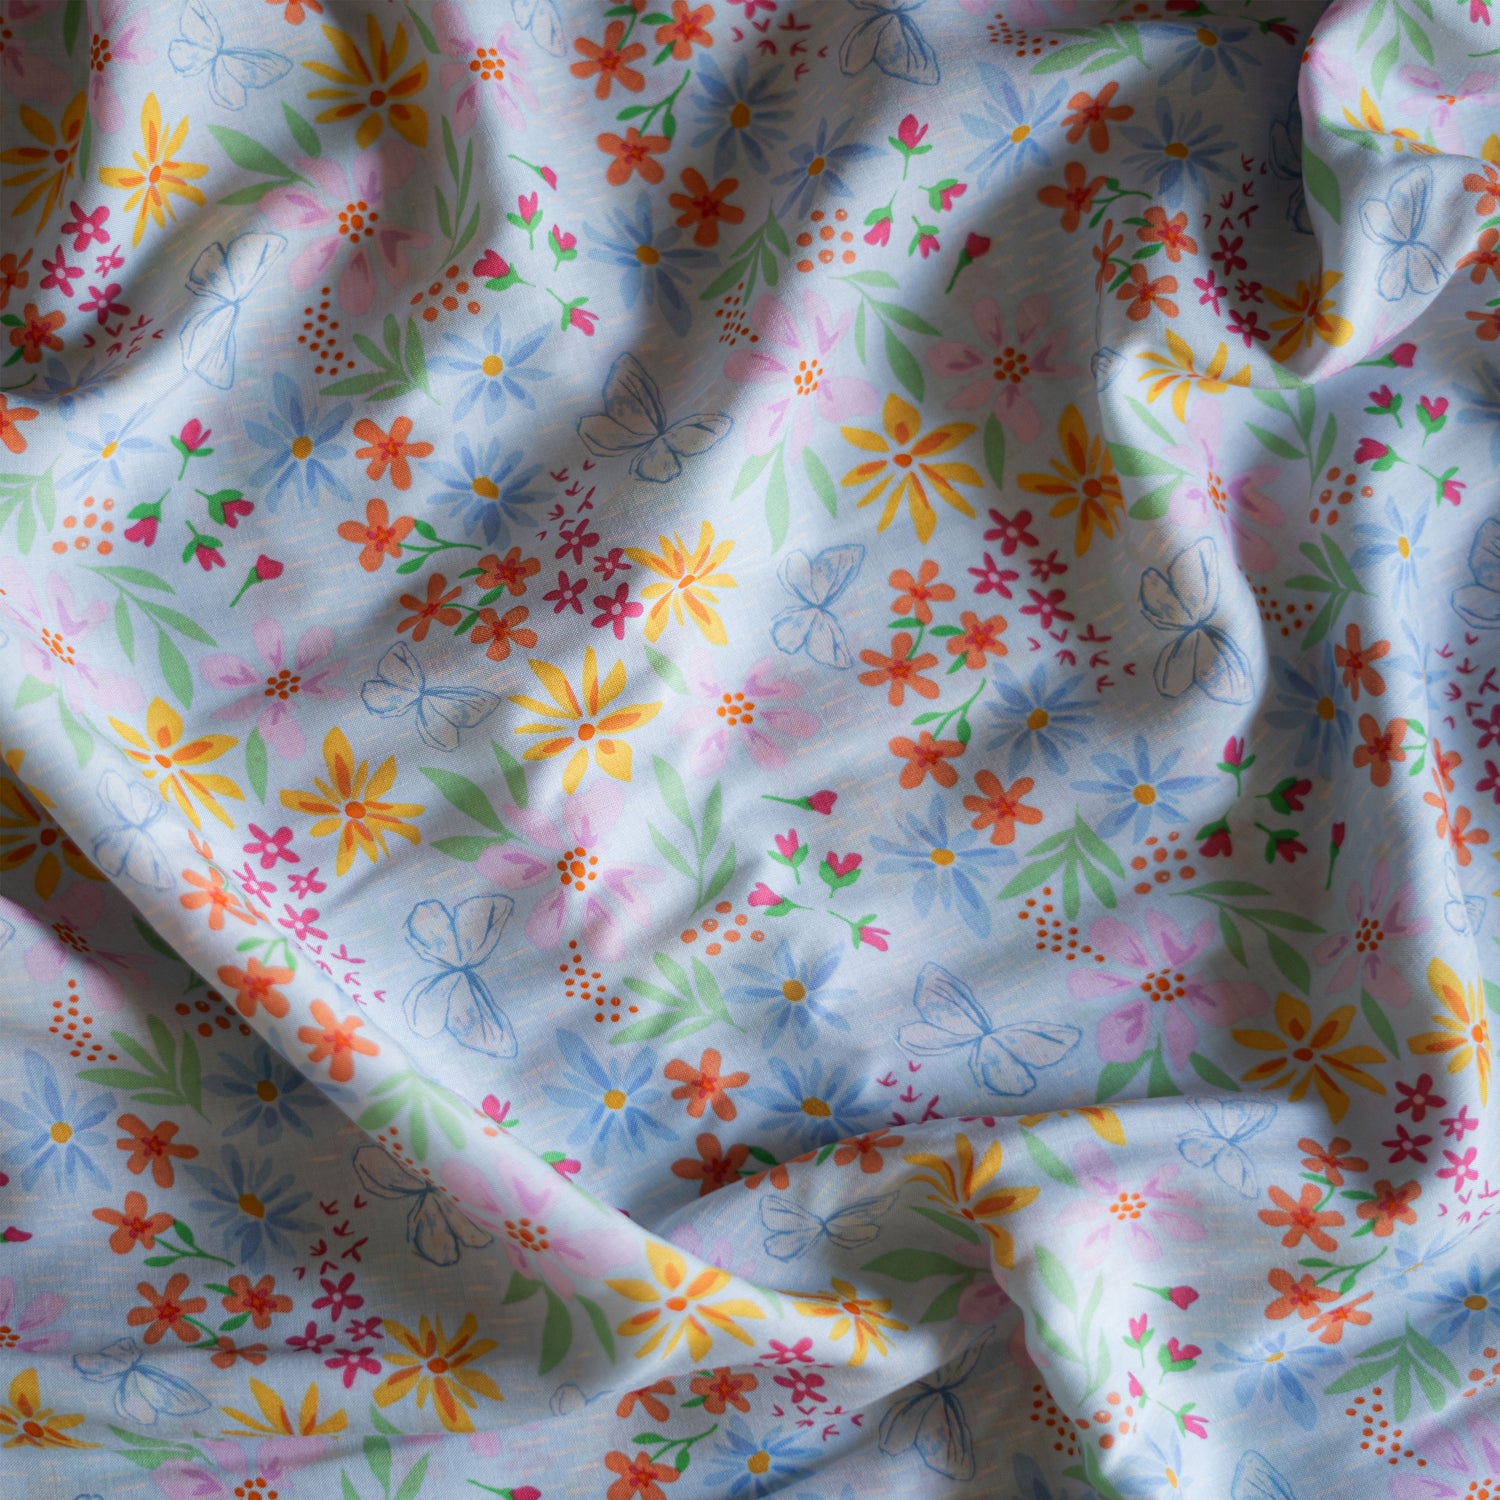 Rayon - AGF Flying Wild Cloud - Patterned Fabric